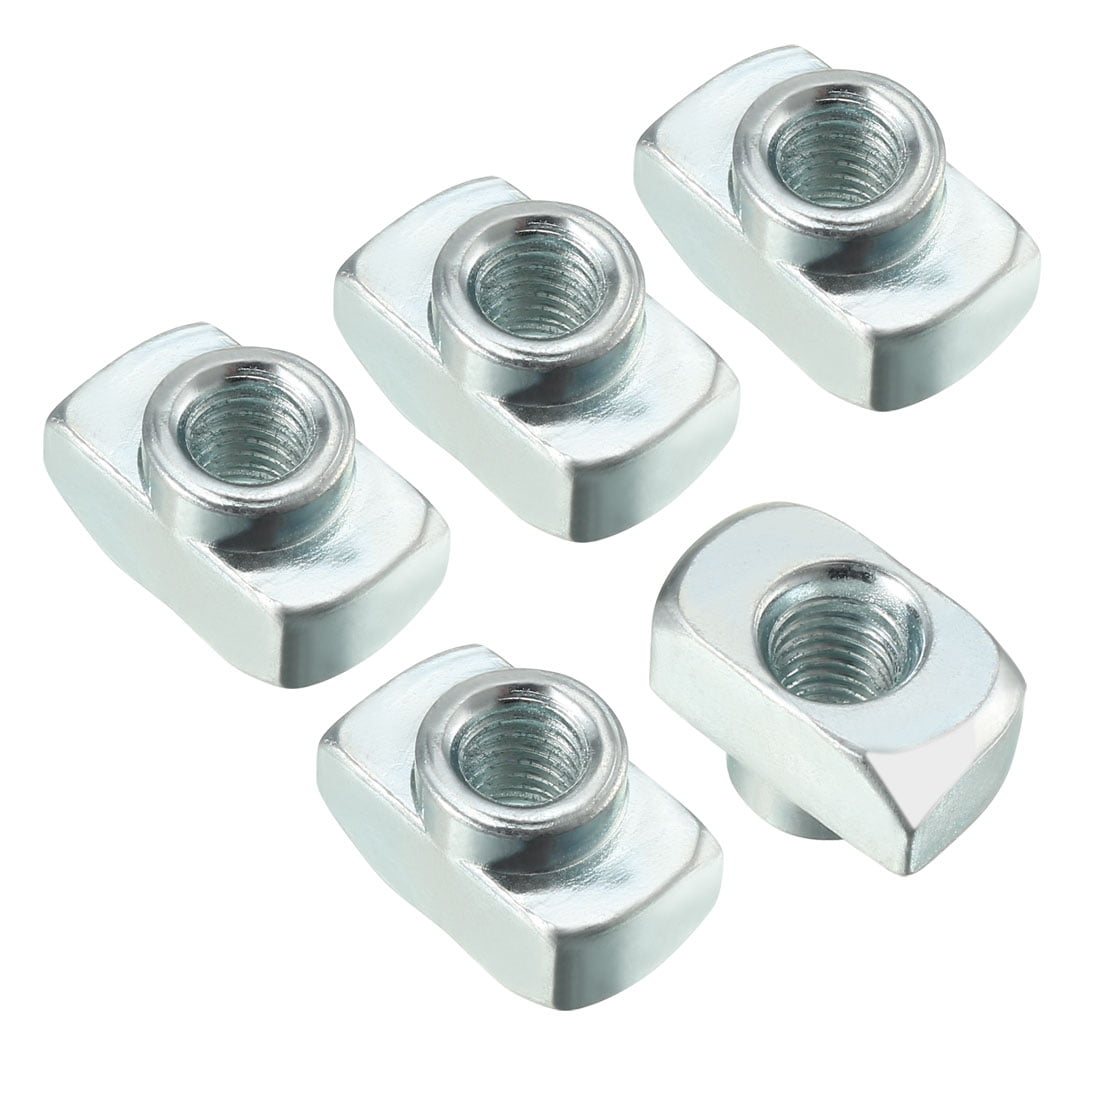 Drop in T Slot Nut for 4040 Aluminum Extrusion Profile with Slot 8mm PACK 50 